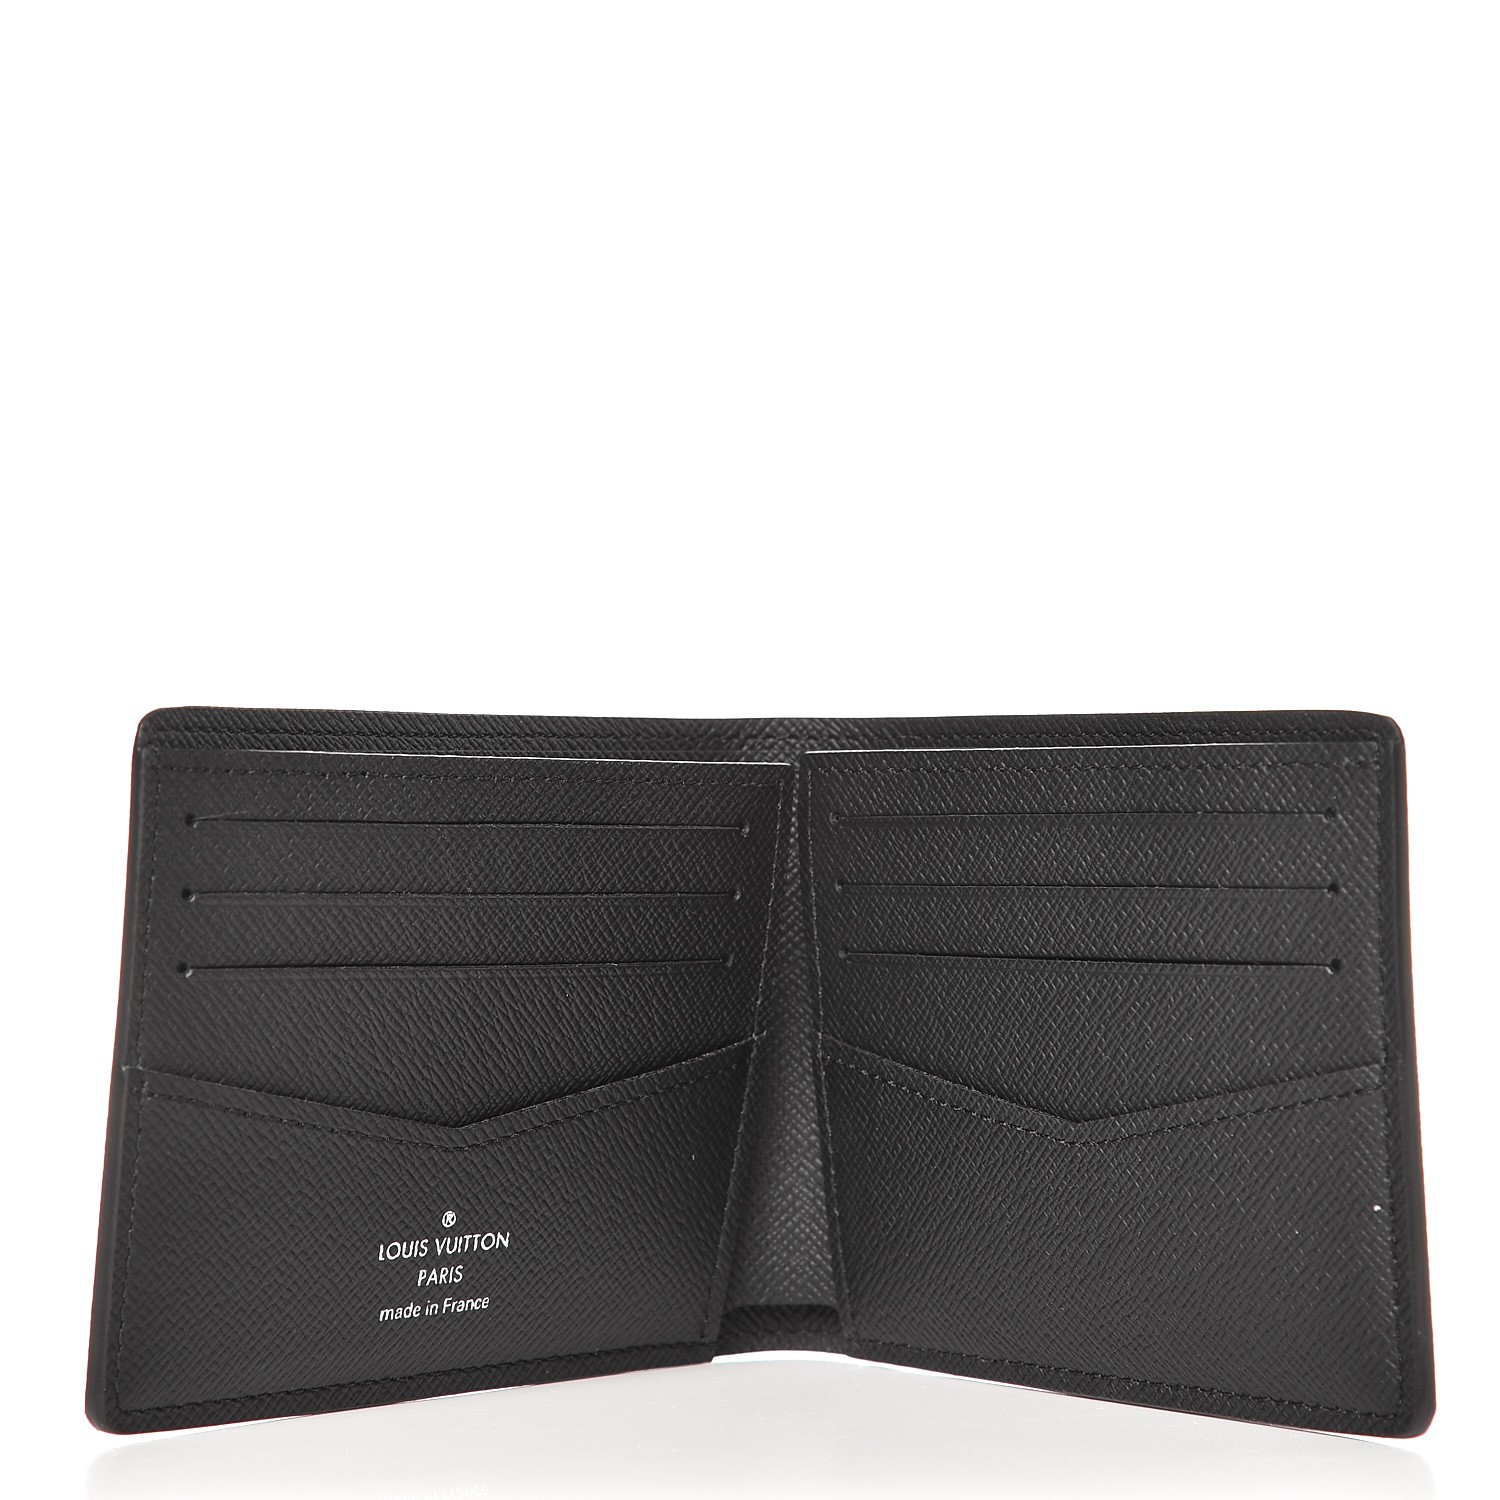 Slender Wallet Damier Graphite Canvas - Wallets and Small Leather Goods